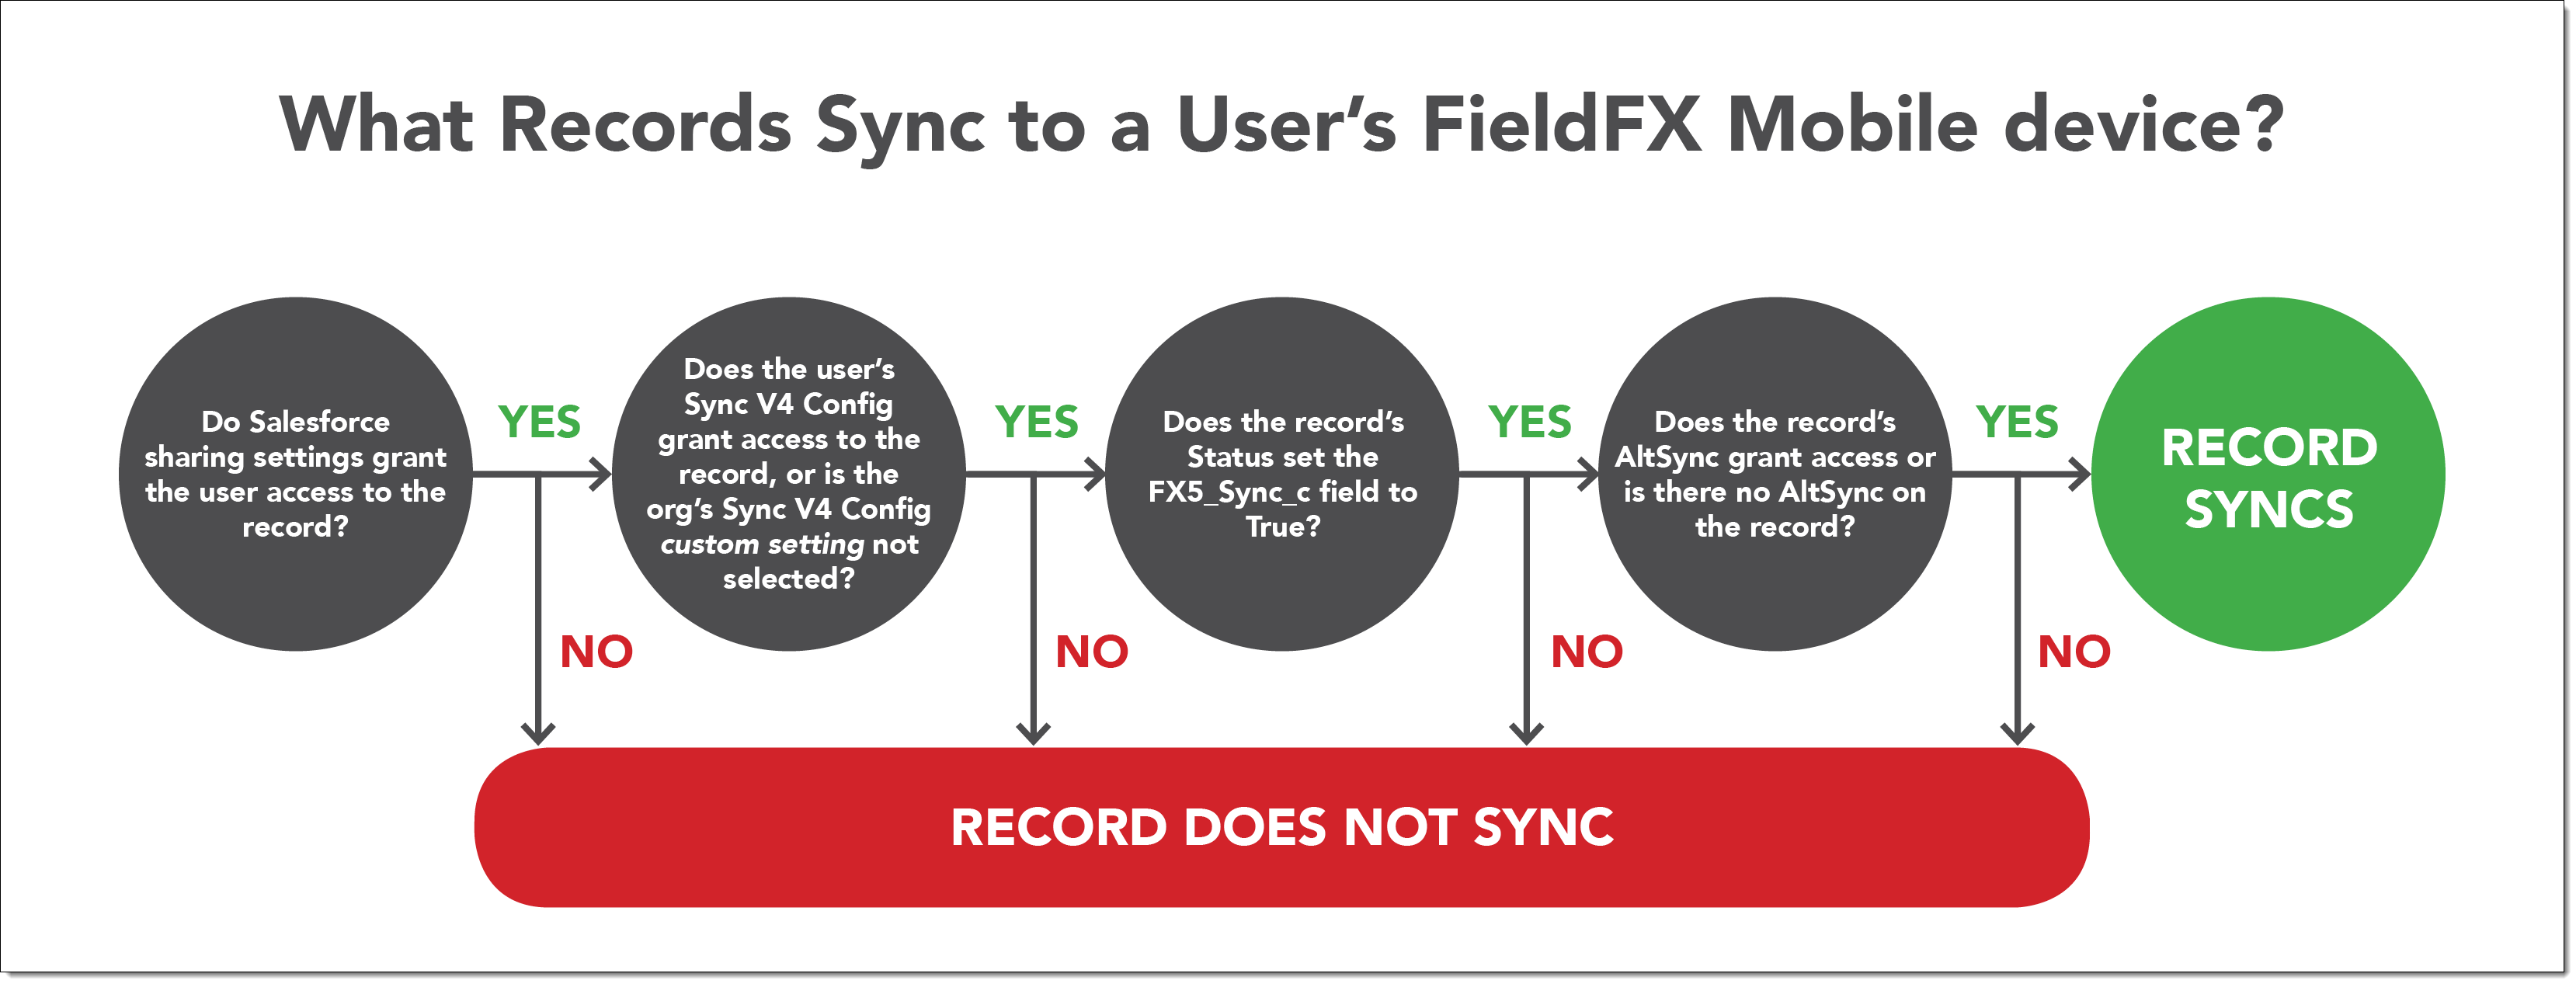 Flowchart of the decisions used to determine if a record syncs